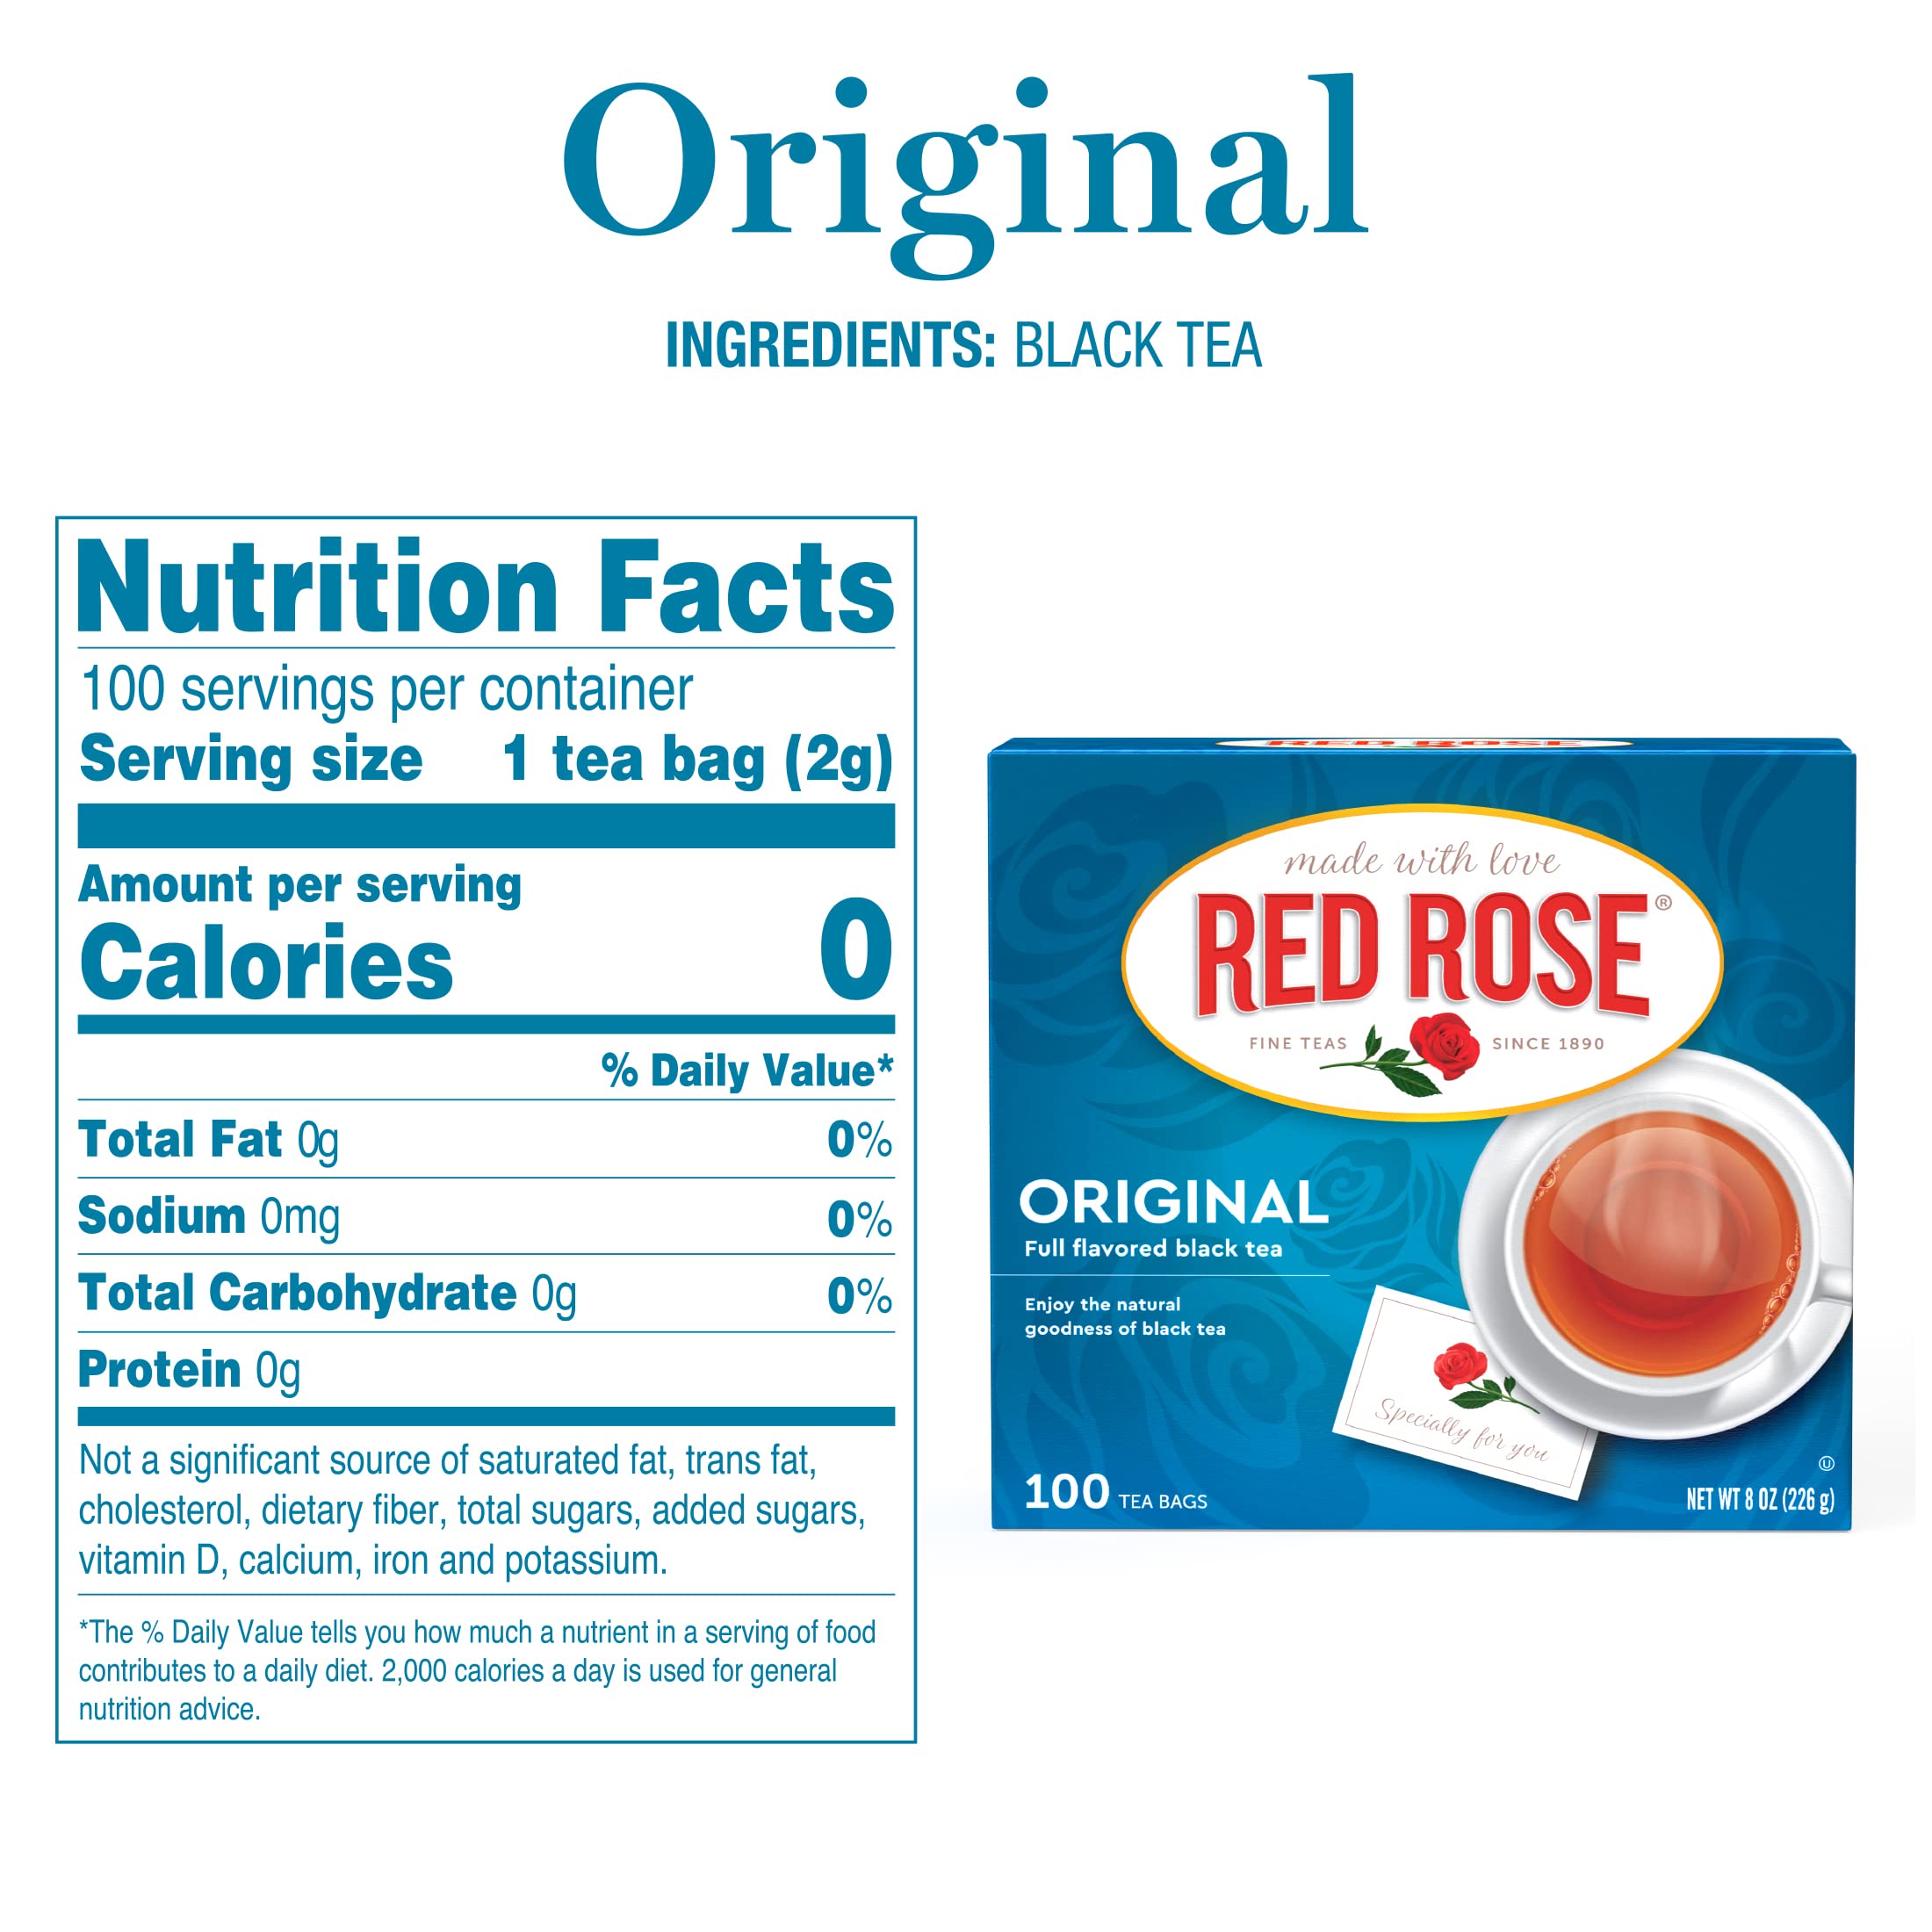 Red Rose Original Full Flavored Black Tea Specially Blended Strong Black Tea with 100 Tea Bags Per Box (Pack of 2) Contains Caffeine Brew Hot/Cold Original Black Tea